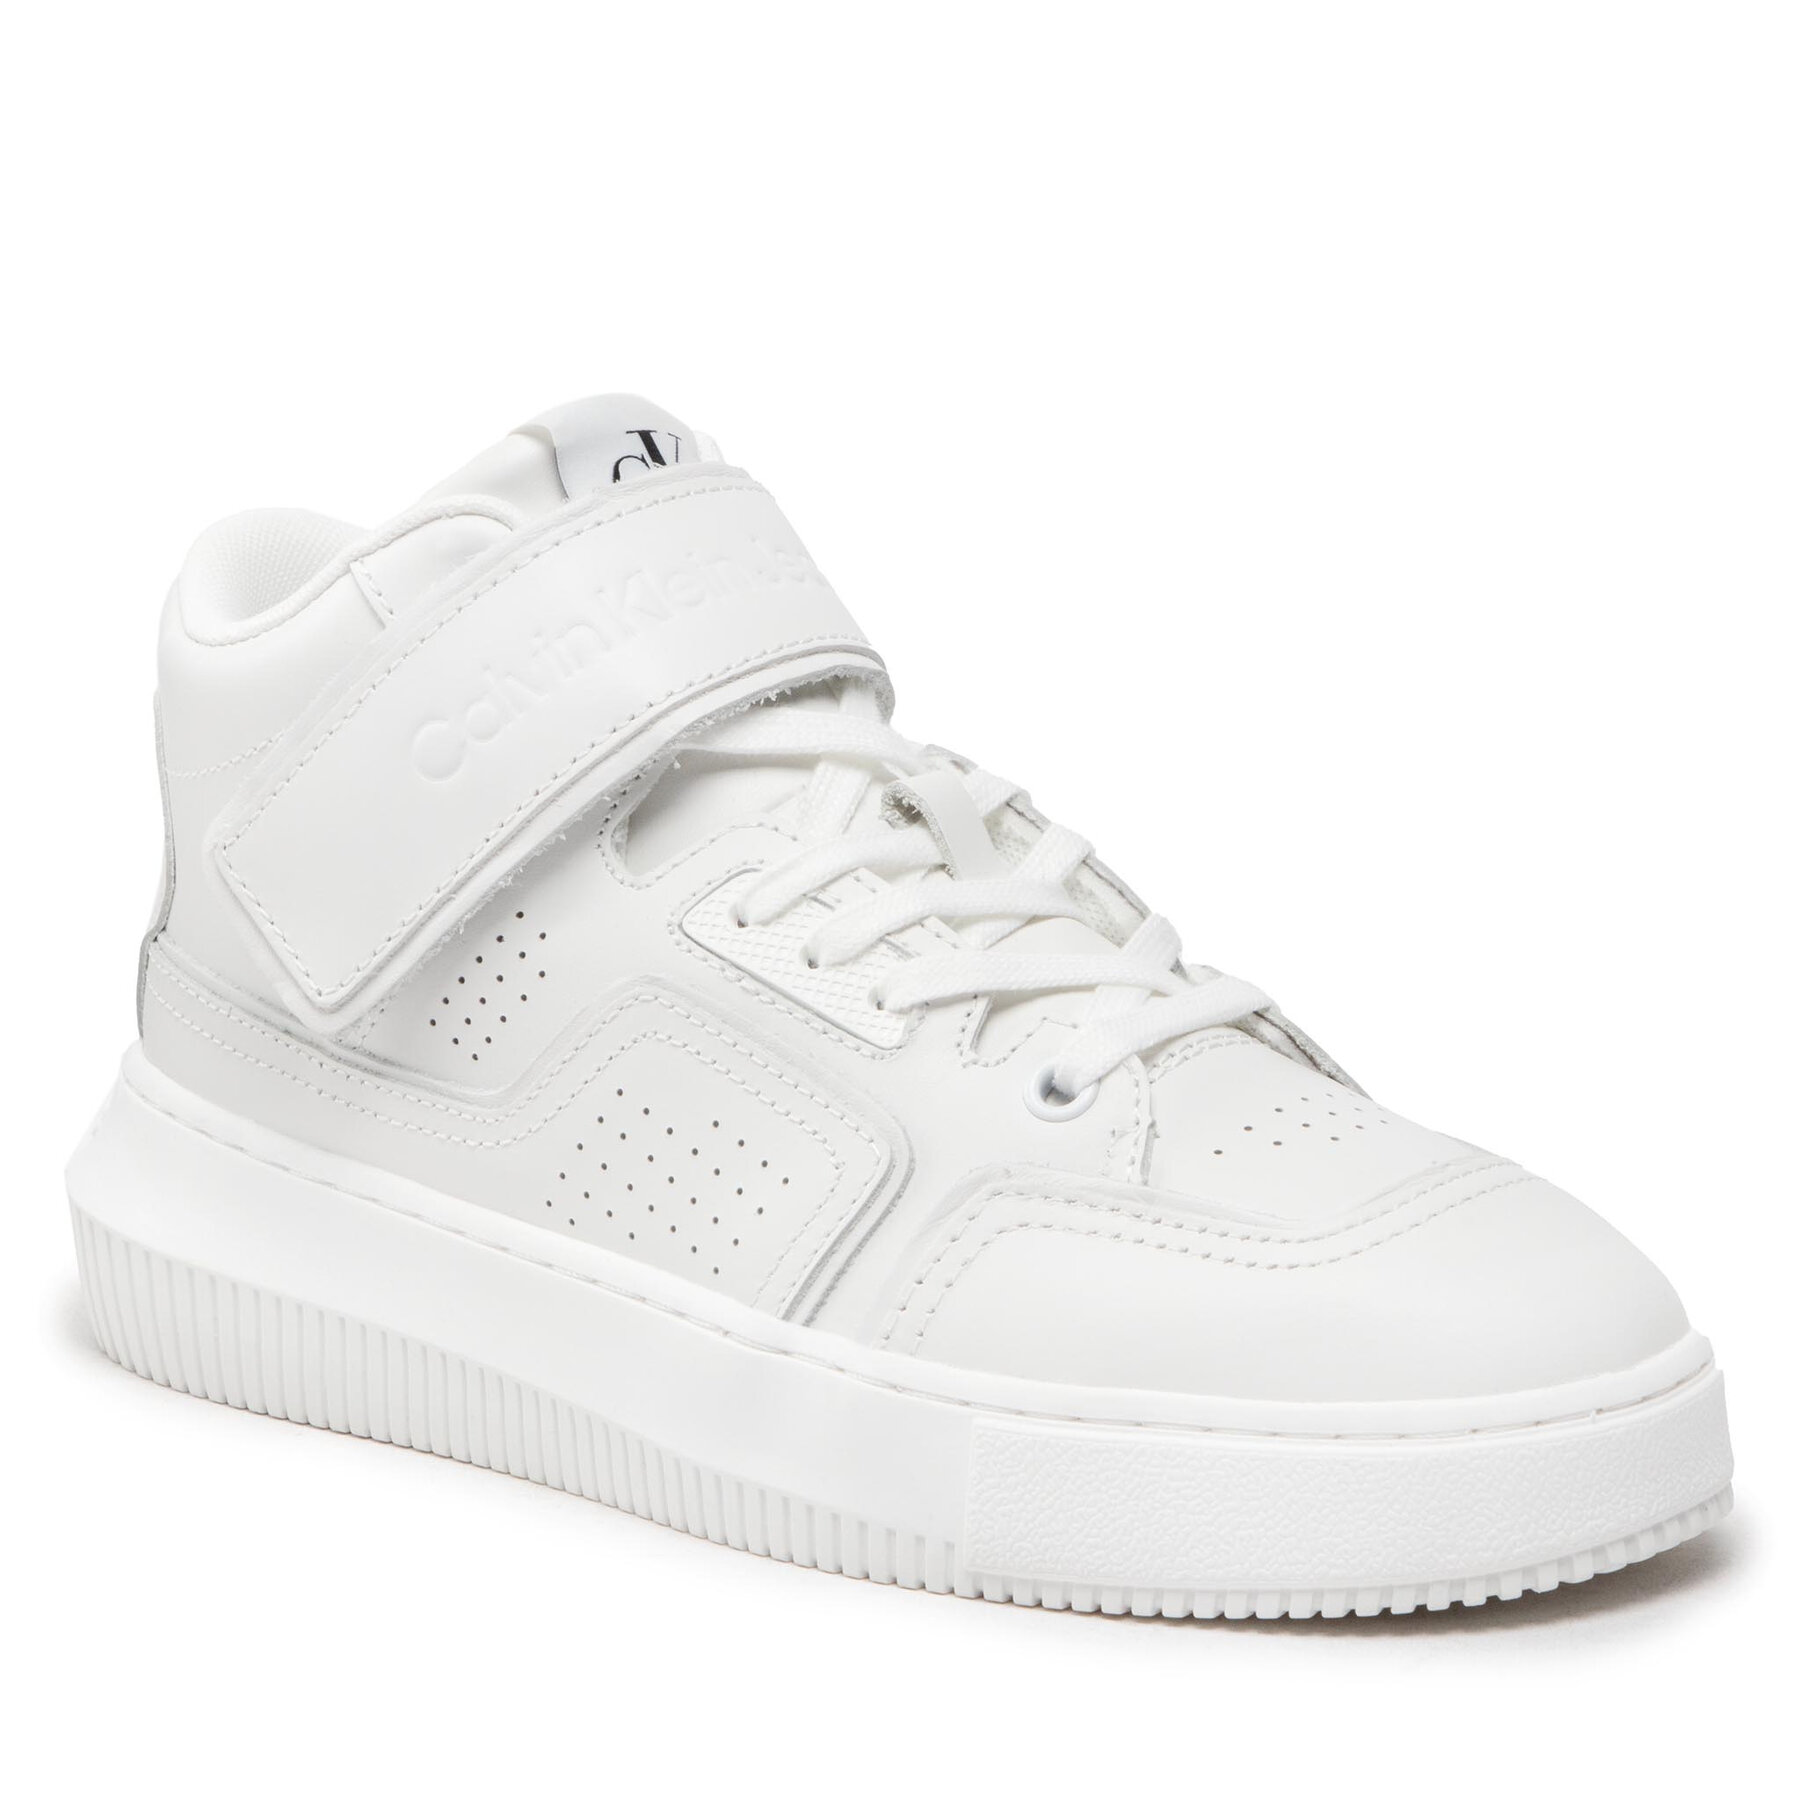 Sneakers Calvin Klein Jeans Chunky Cupsole Laceup Mid Lth Wn YW0YW00841 Bright White YAF CALVIN KLEIN JEANS imagine noua